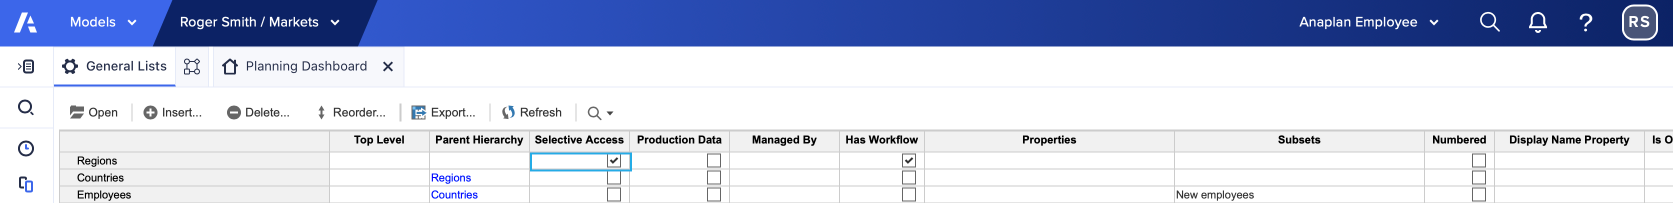 A model open to General Lists displays three lists: Regions, Countries, and Employees. In the column for Selective Access, the checkbox for Regions is selected and displays a checkmark